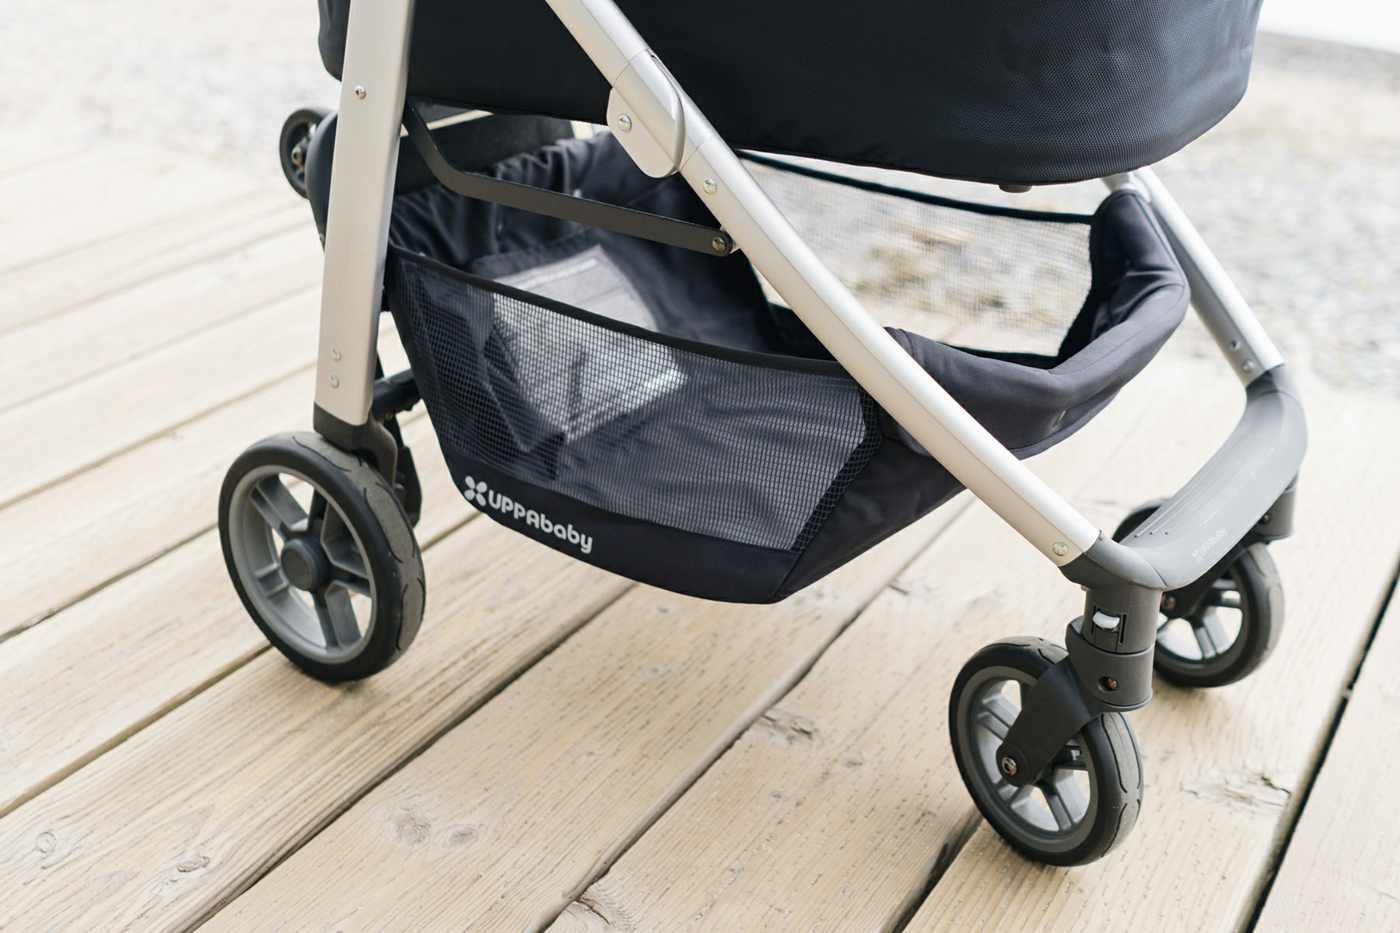 Baby carriage with excellent luggage for luggage and luggage